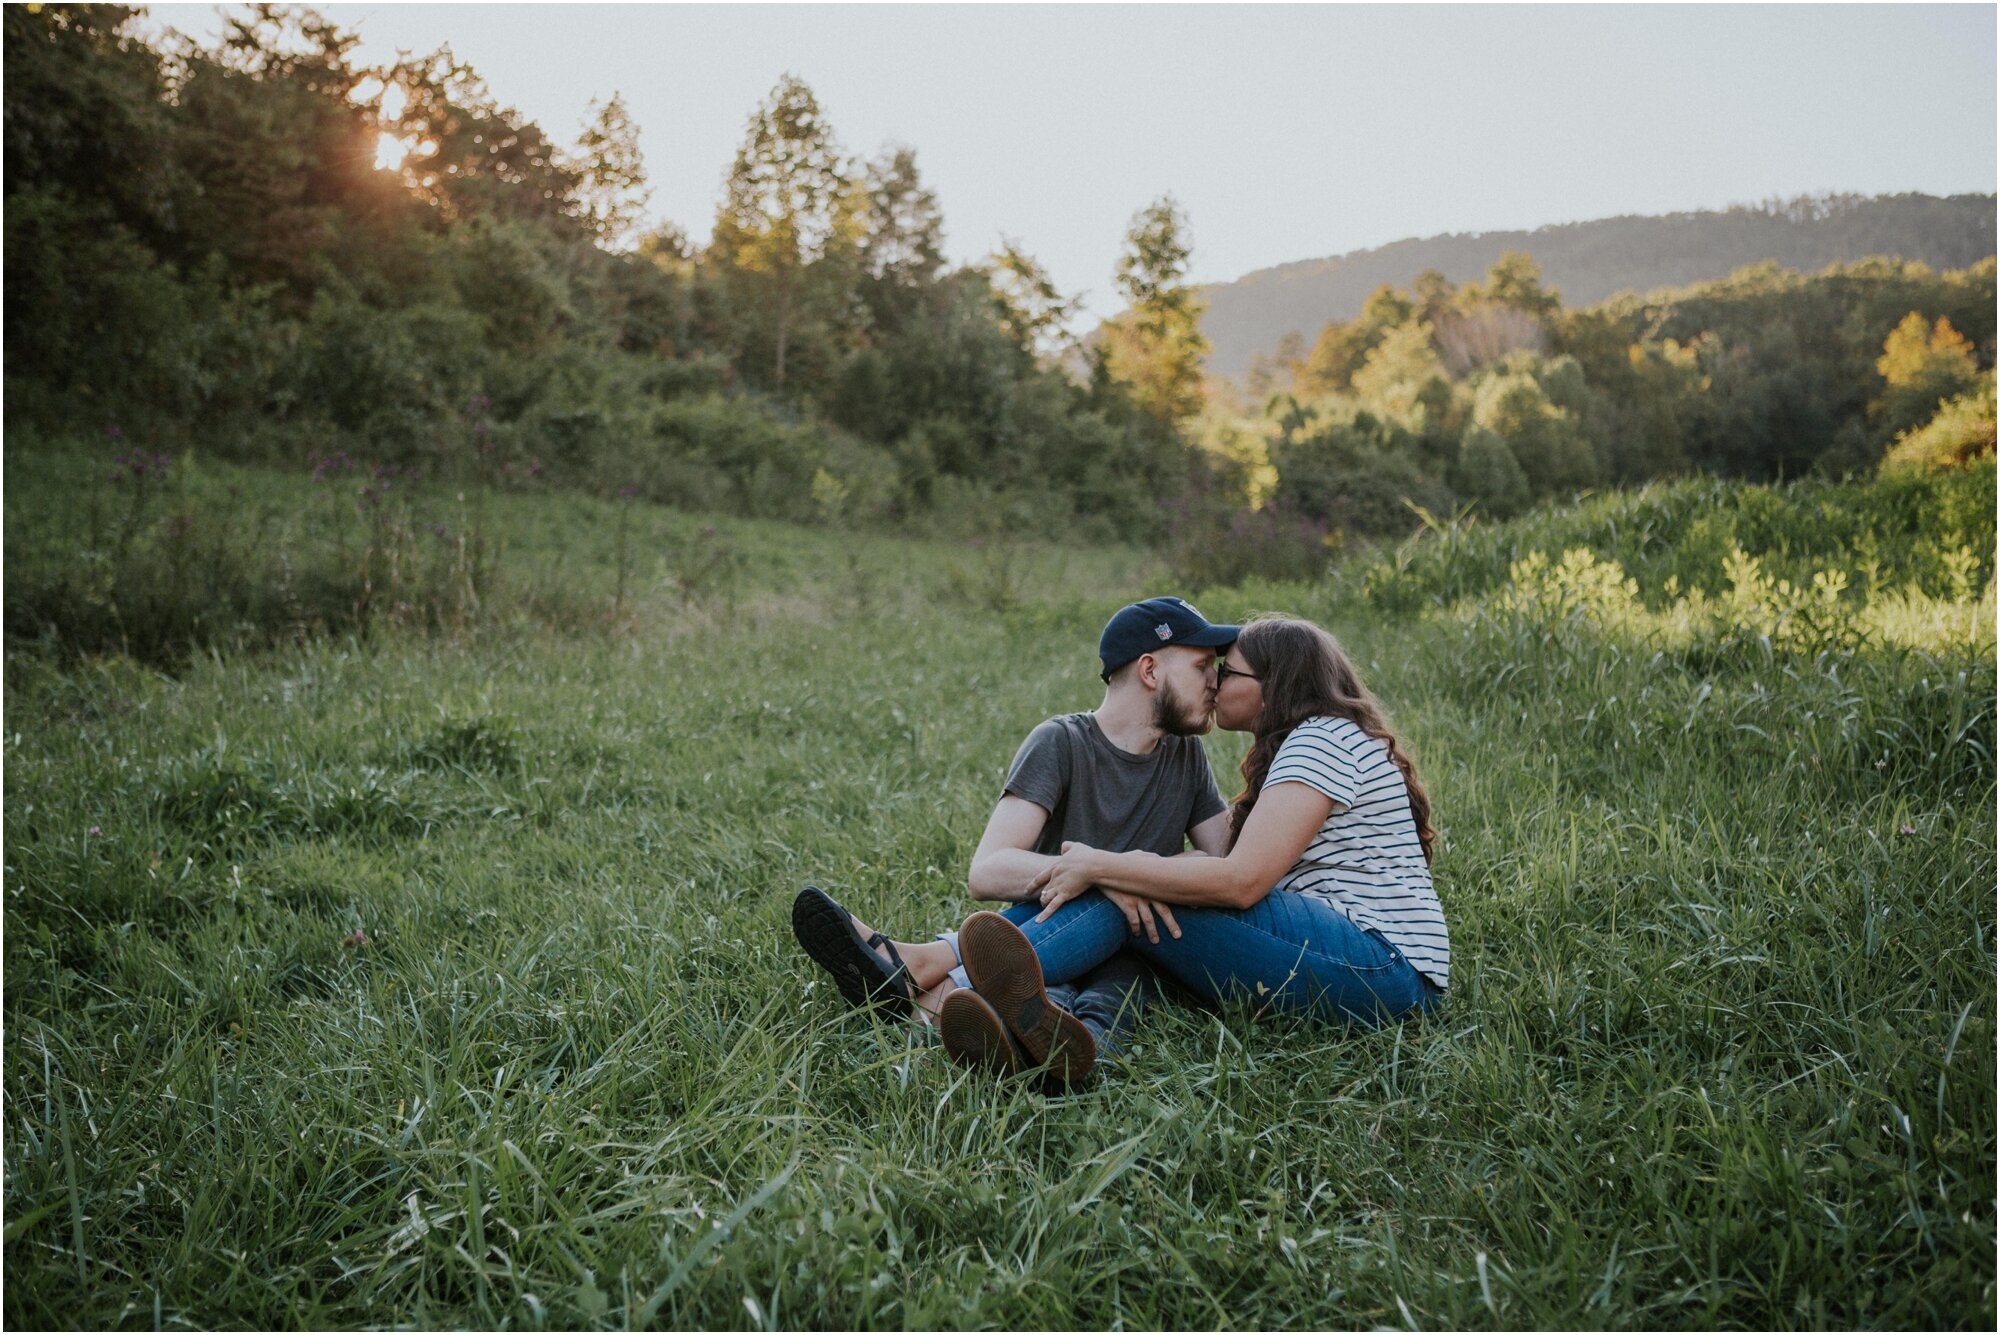 kingsport-tennessee-backyard-pond-bays-mountain-summer-engagement-session_0014.jpg